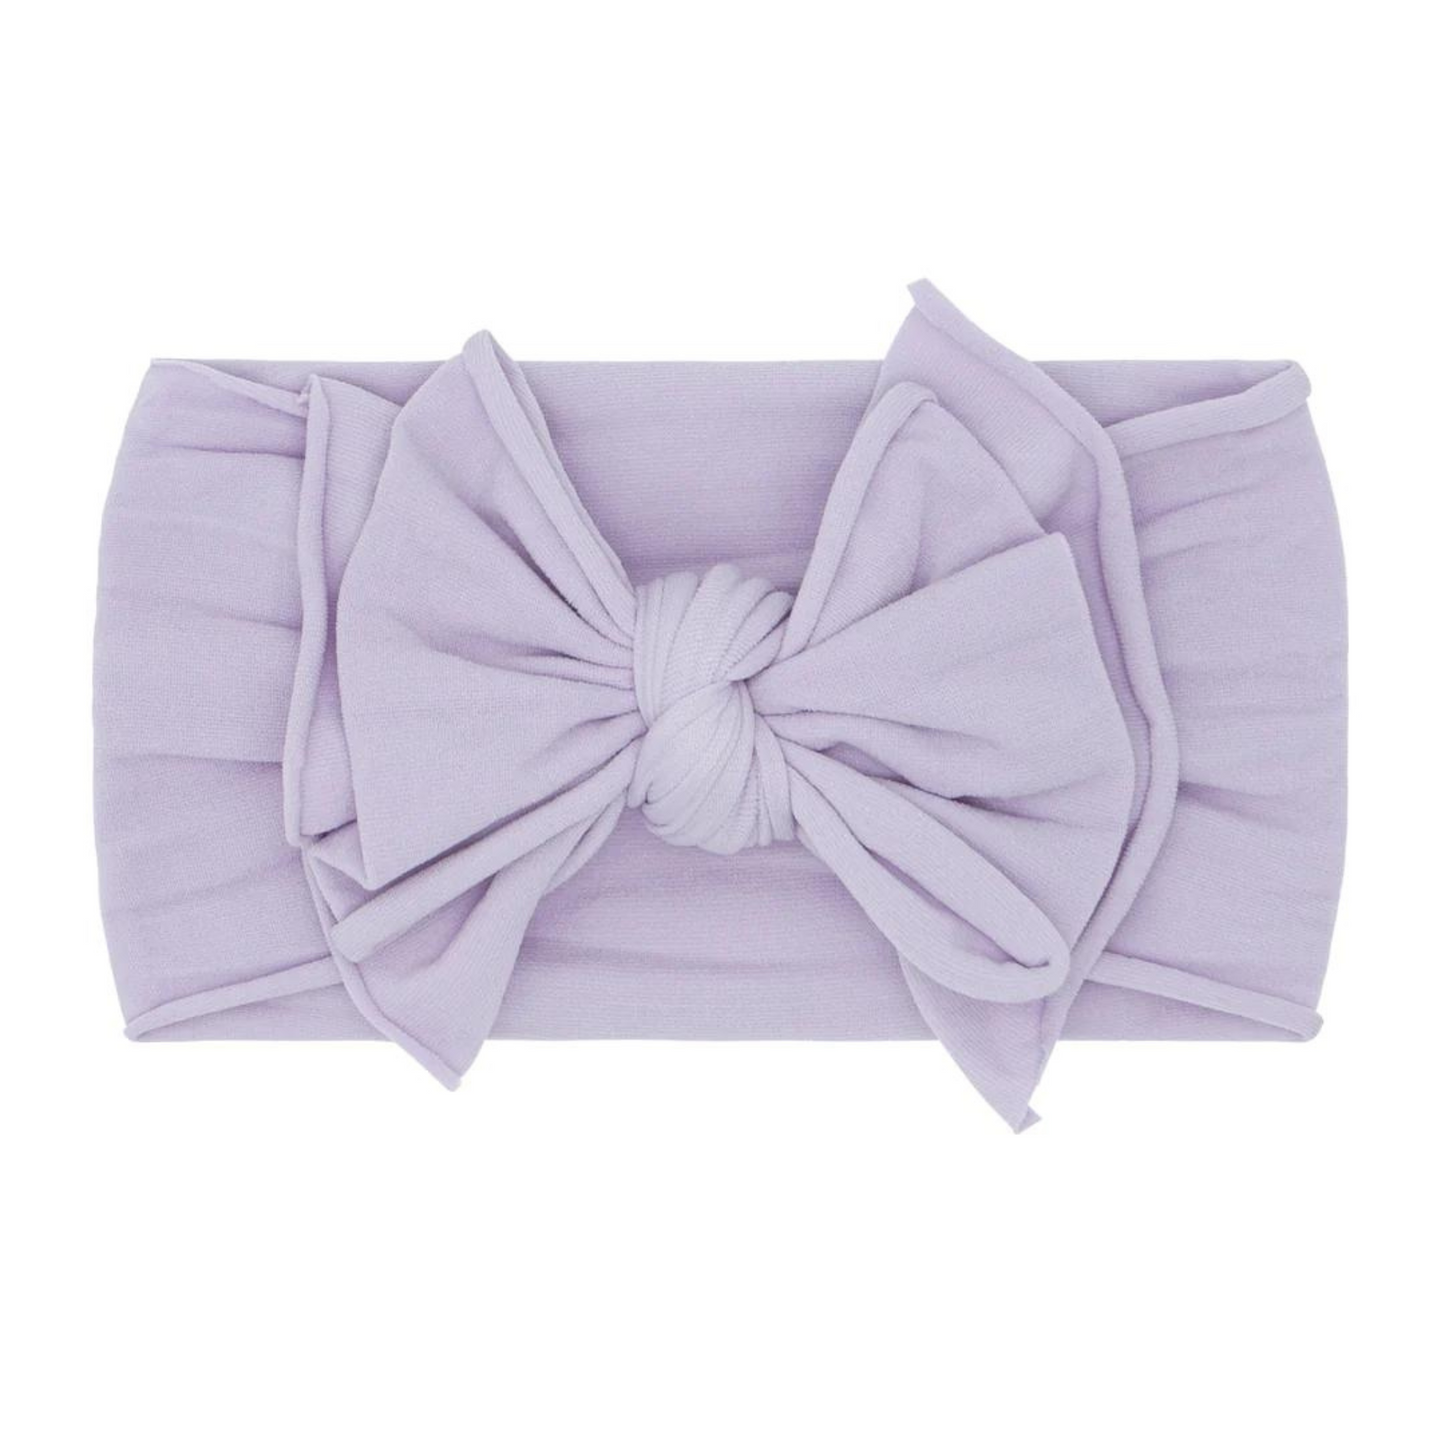 FAB-BOW-LOUS Bow, Light Orchid